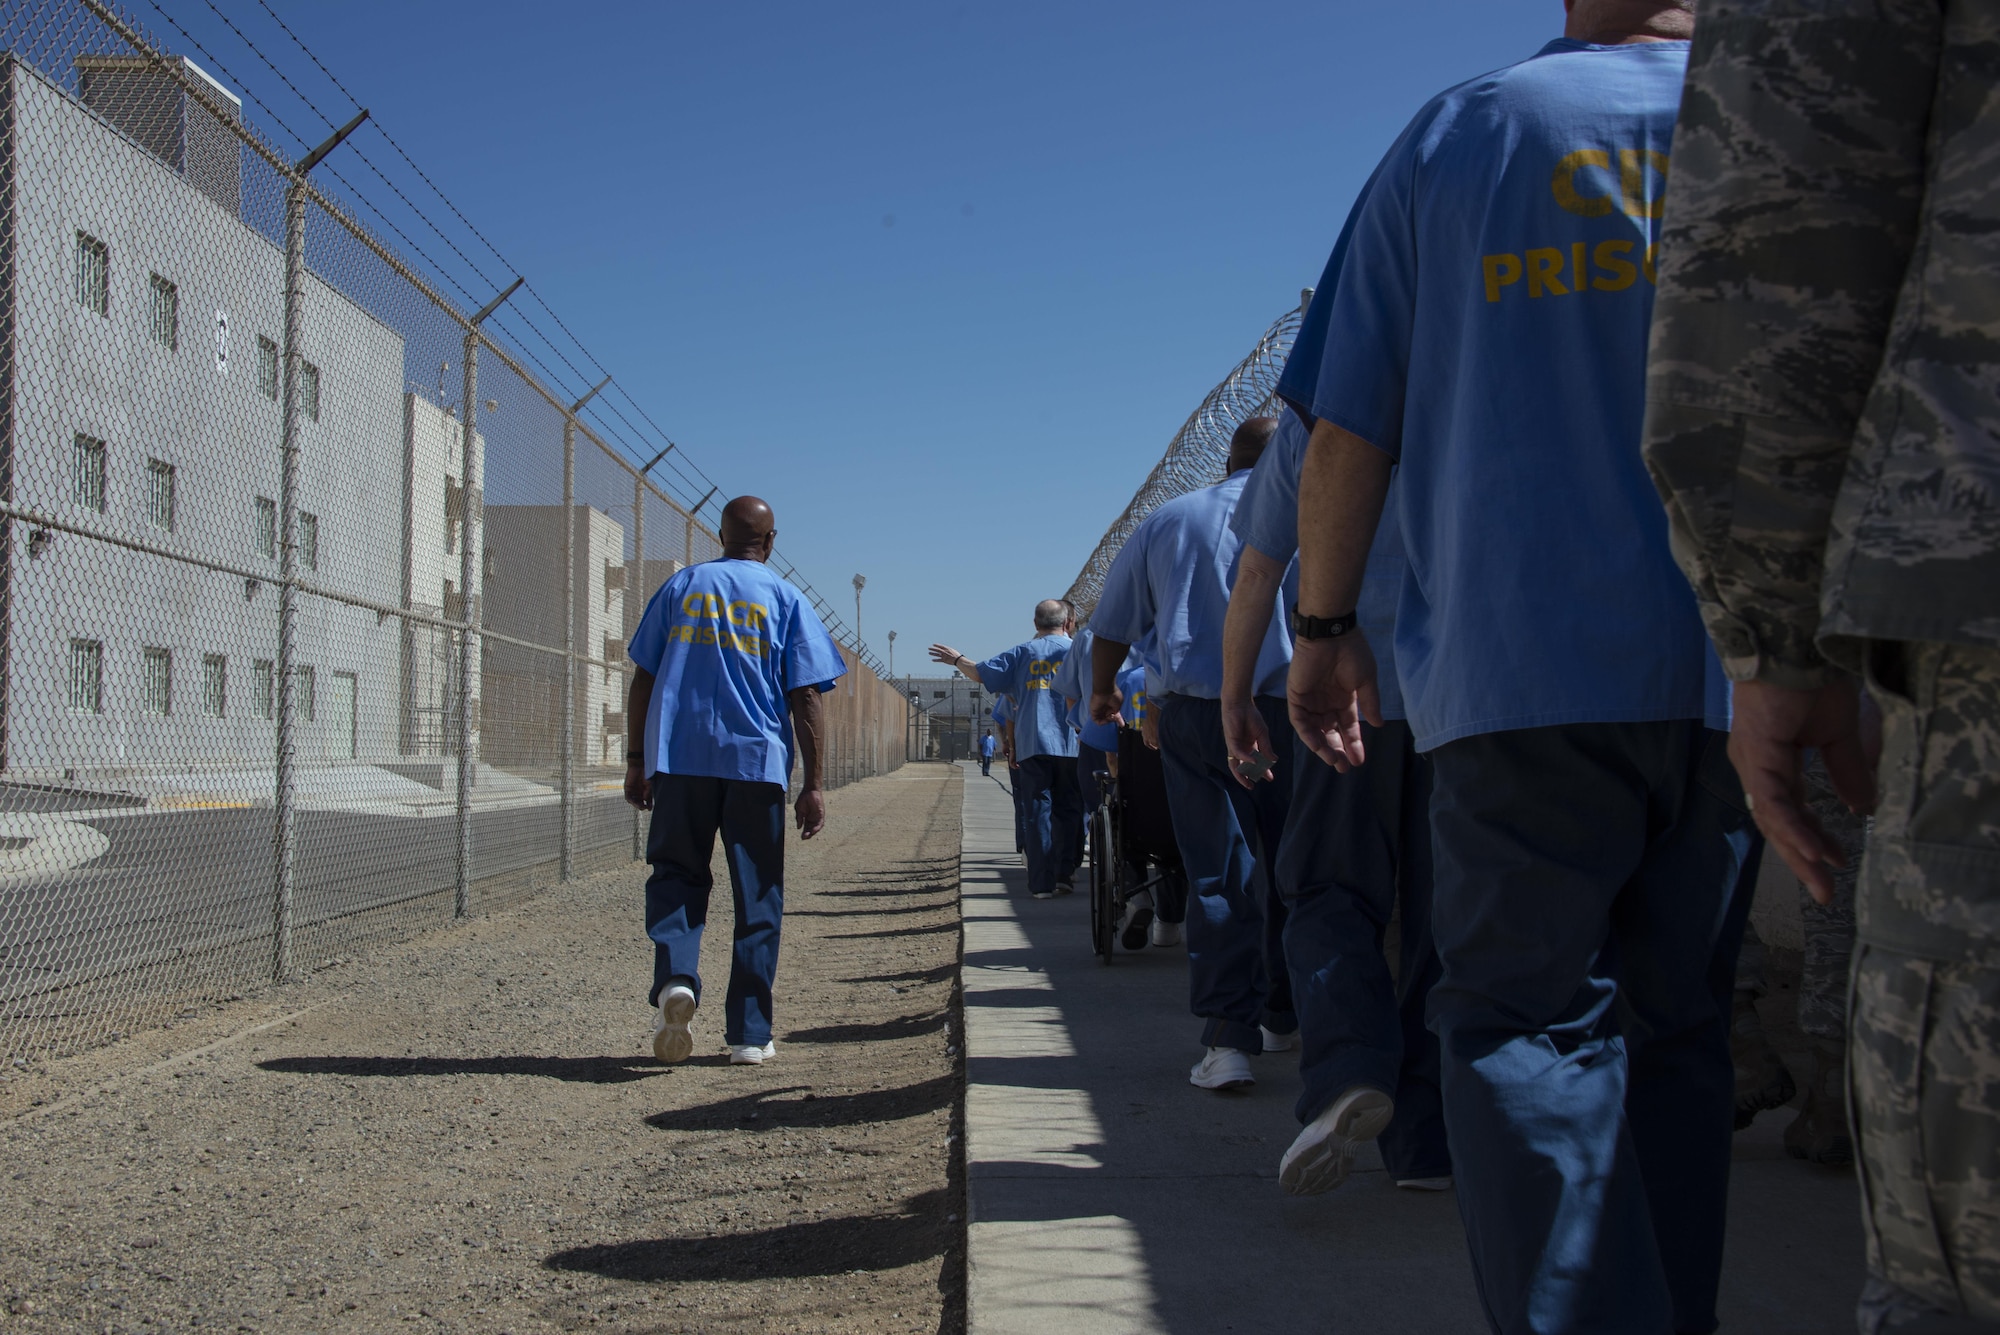 Inmates at the California Medical Facility provide a tour to Airmen participating in the True North program of the prision at the CMF, in Vacaville, Calif., Sept. 15, 2016. As part of the program, Airmen meet with inmates at CMF and hear their personal stories as well as tour the facility. (U.S. Air Force photo by Staff Sgt. Charles Rivezzo)